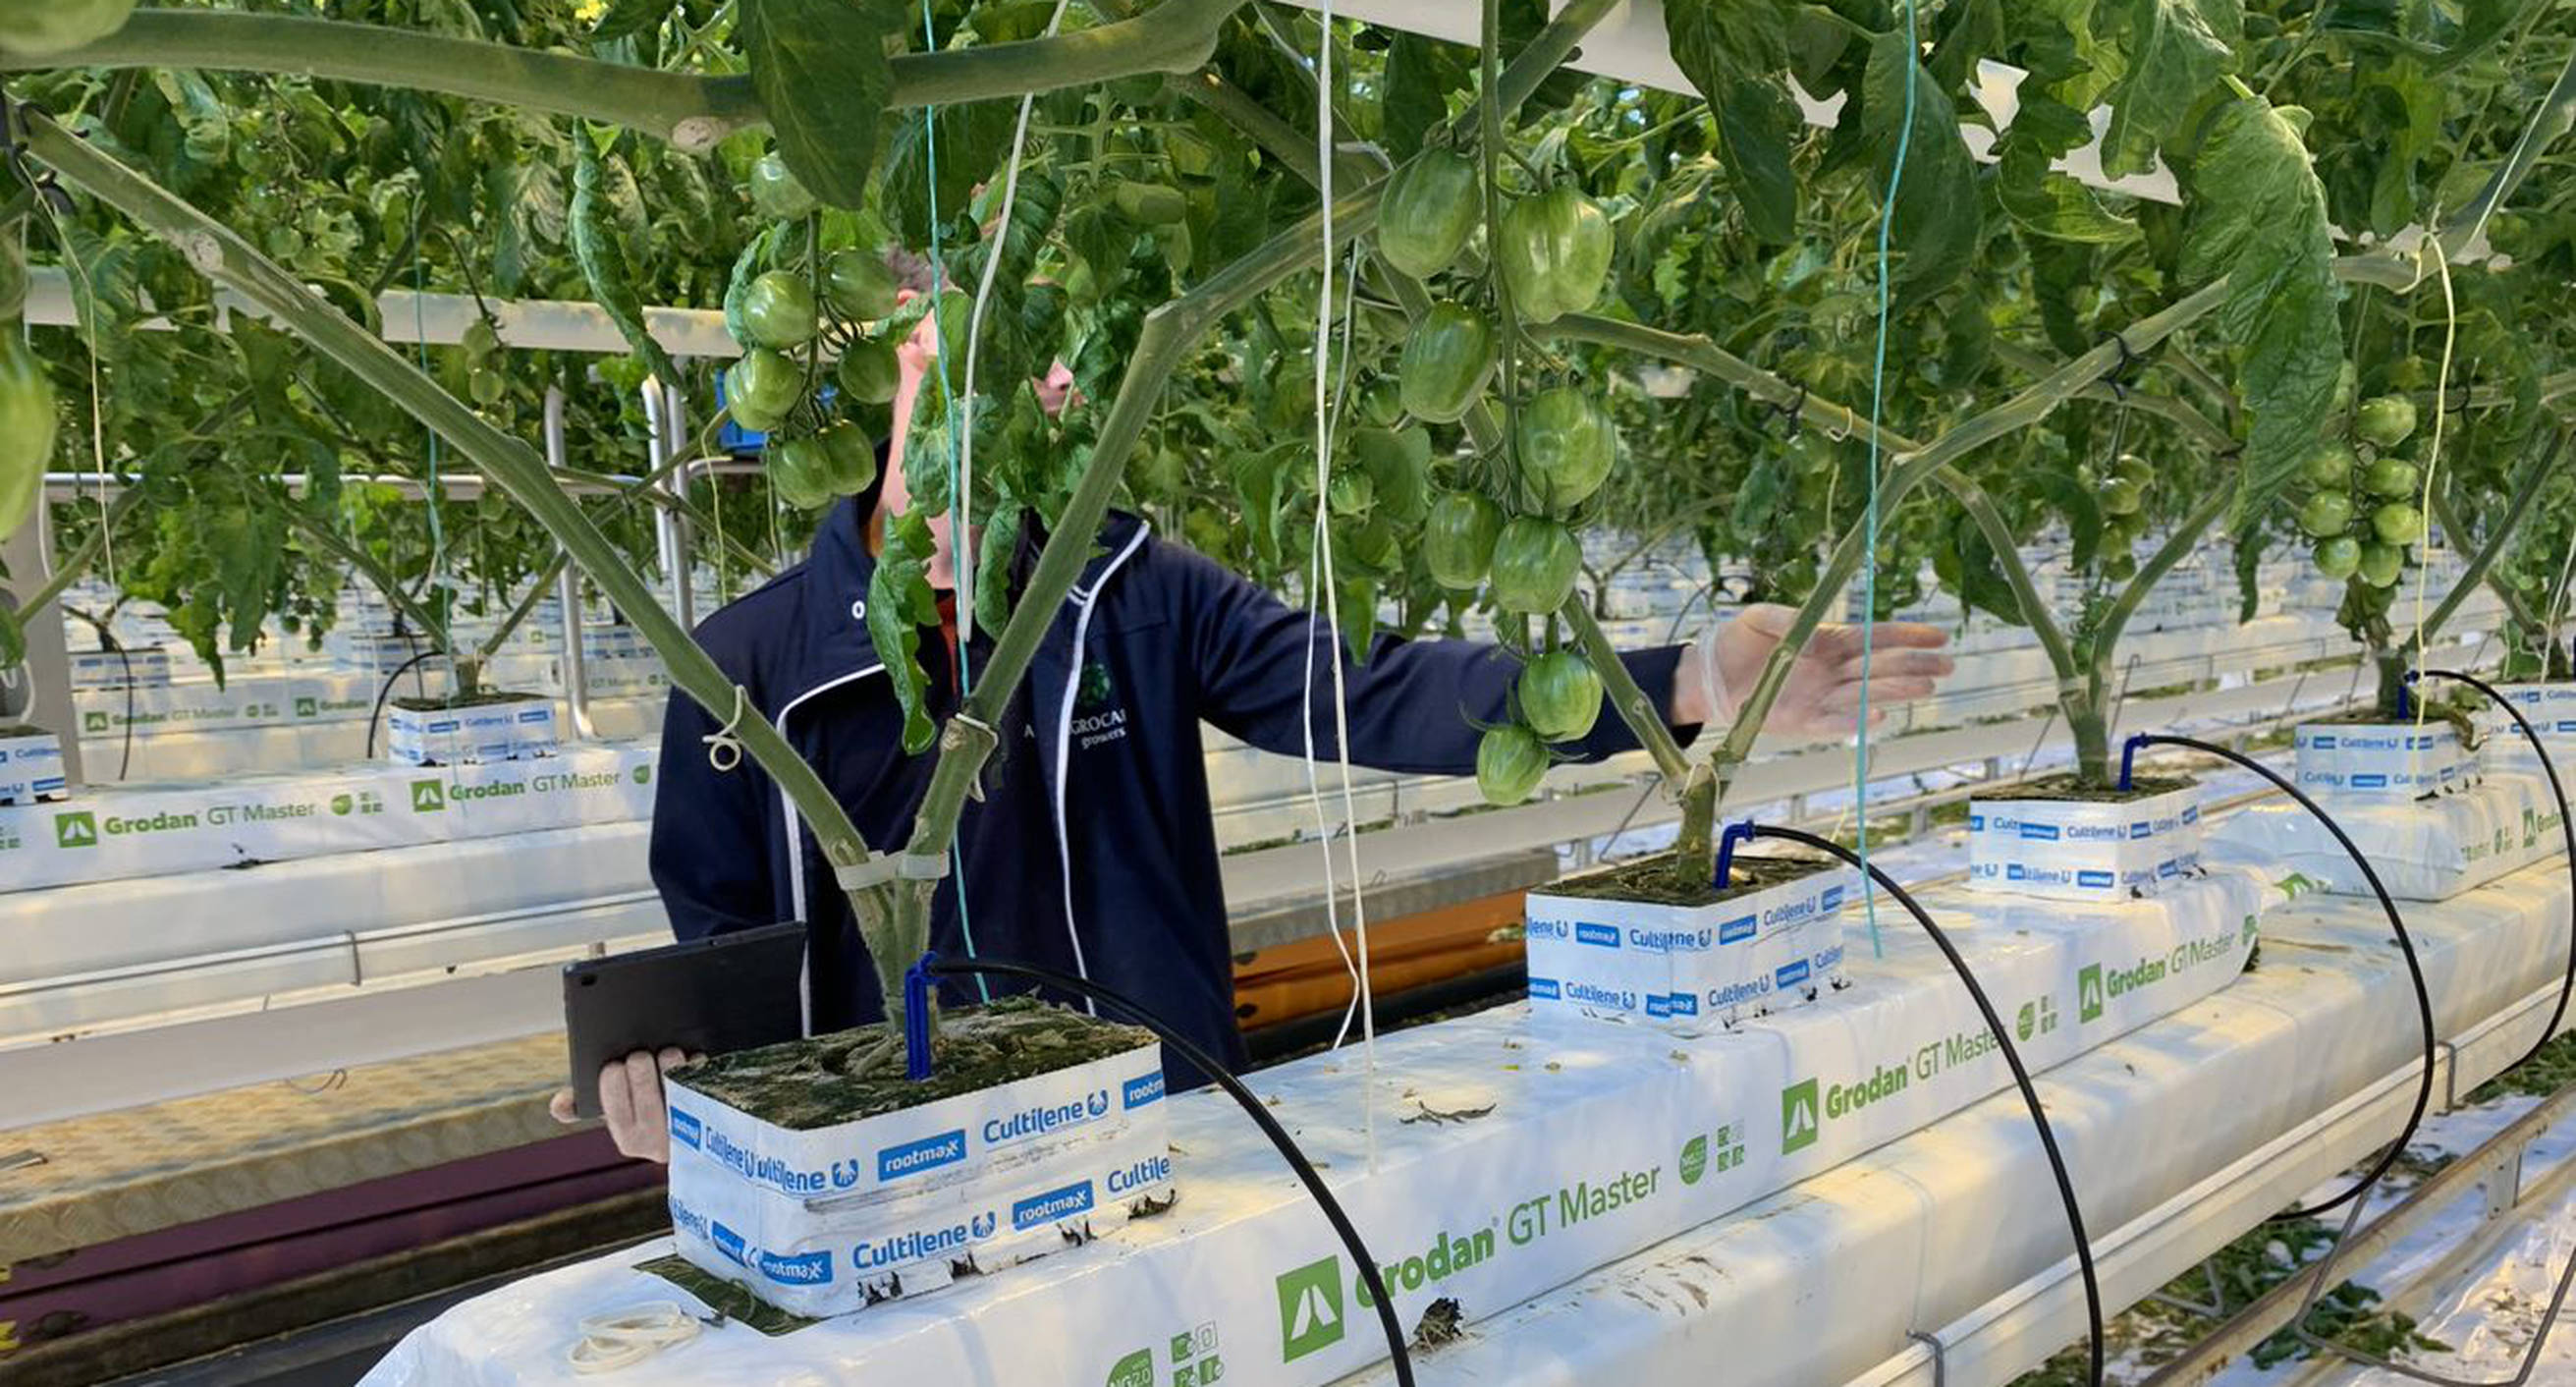 Example of the use of the digital twin with paprika plants